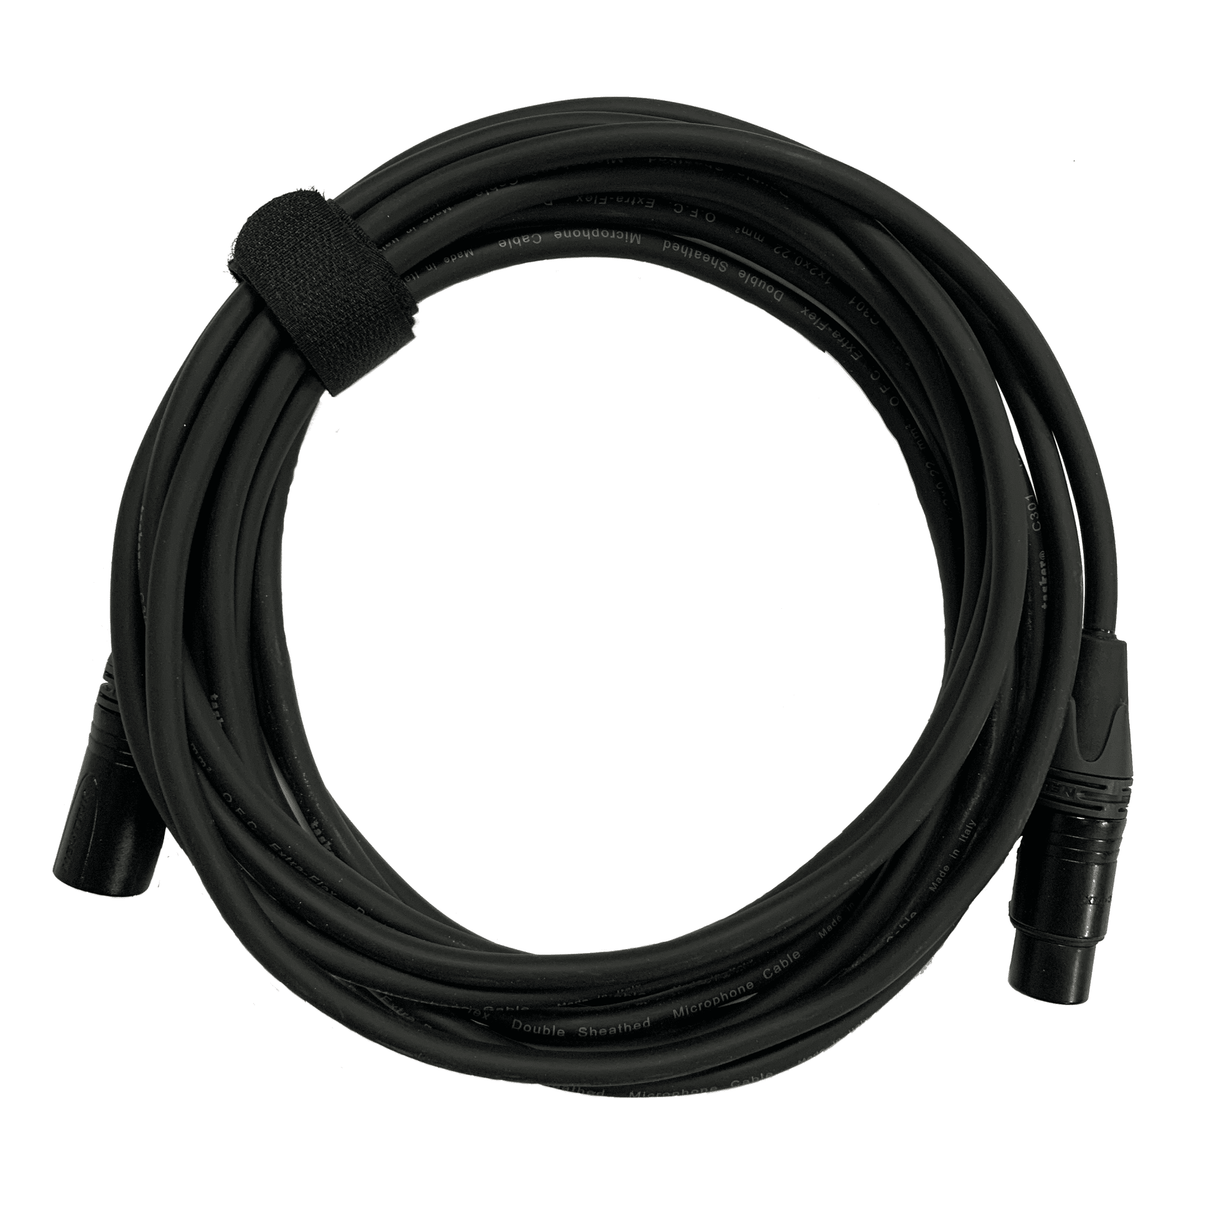 Rough Cable's XLR Cable A+ kwaliteit | 10 Meter